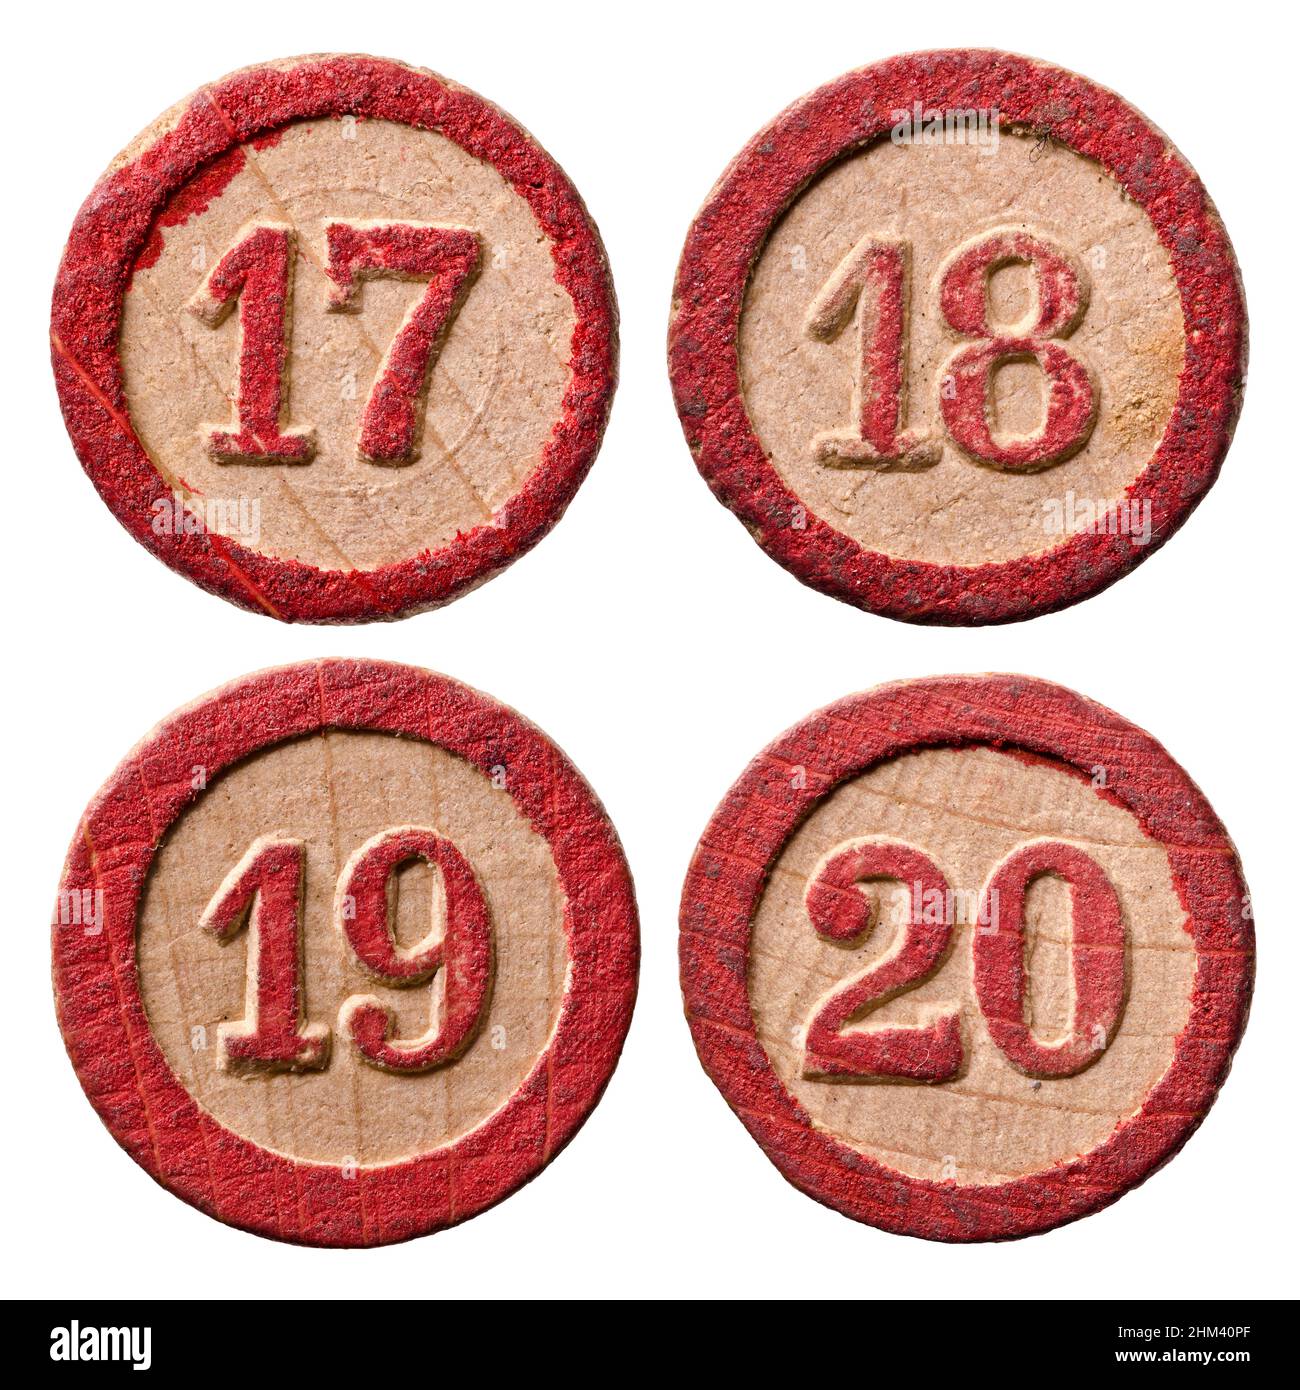 Vintage Wooden Lotto Numbers - 17 - 18 - 19 - 20 Stock Photo